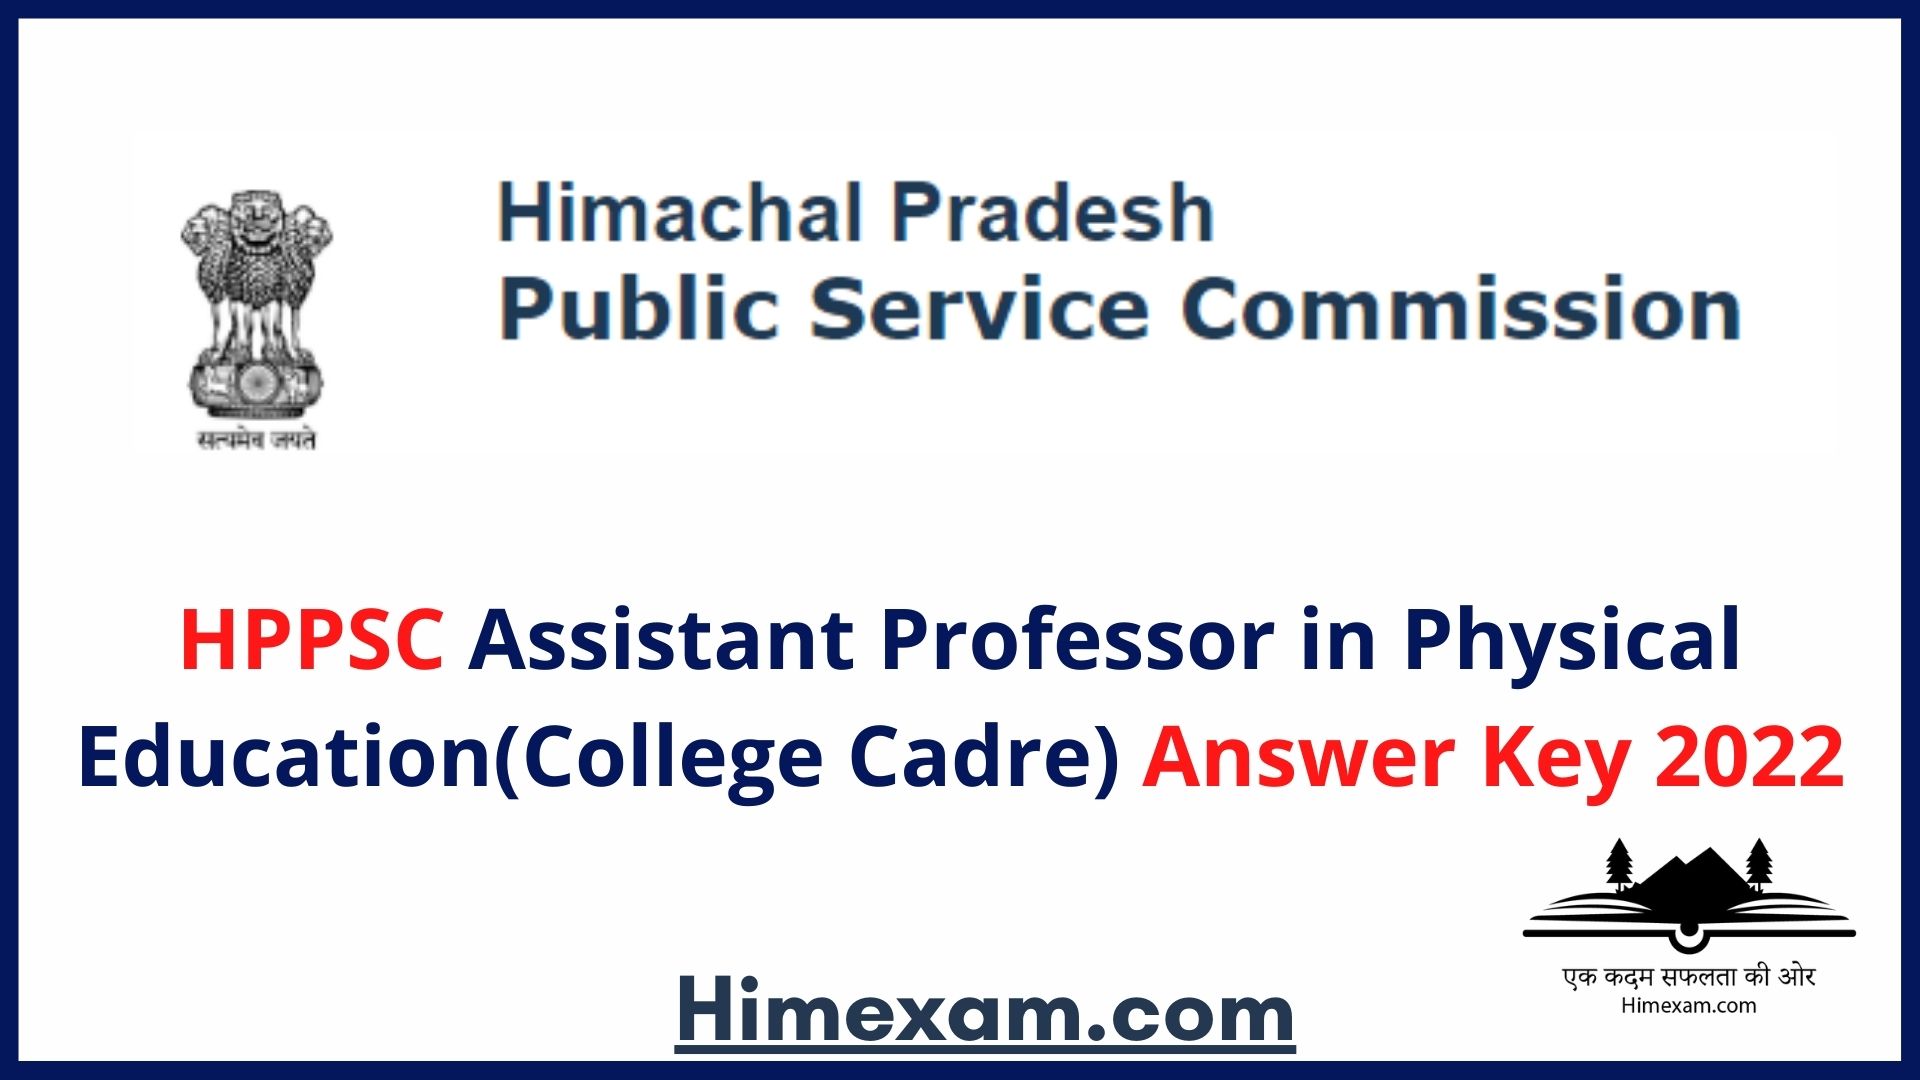 HPPSC Assistant Professor in Physical Education(College Cadre) Answer Key 2022